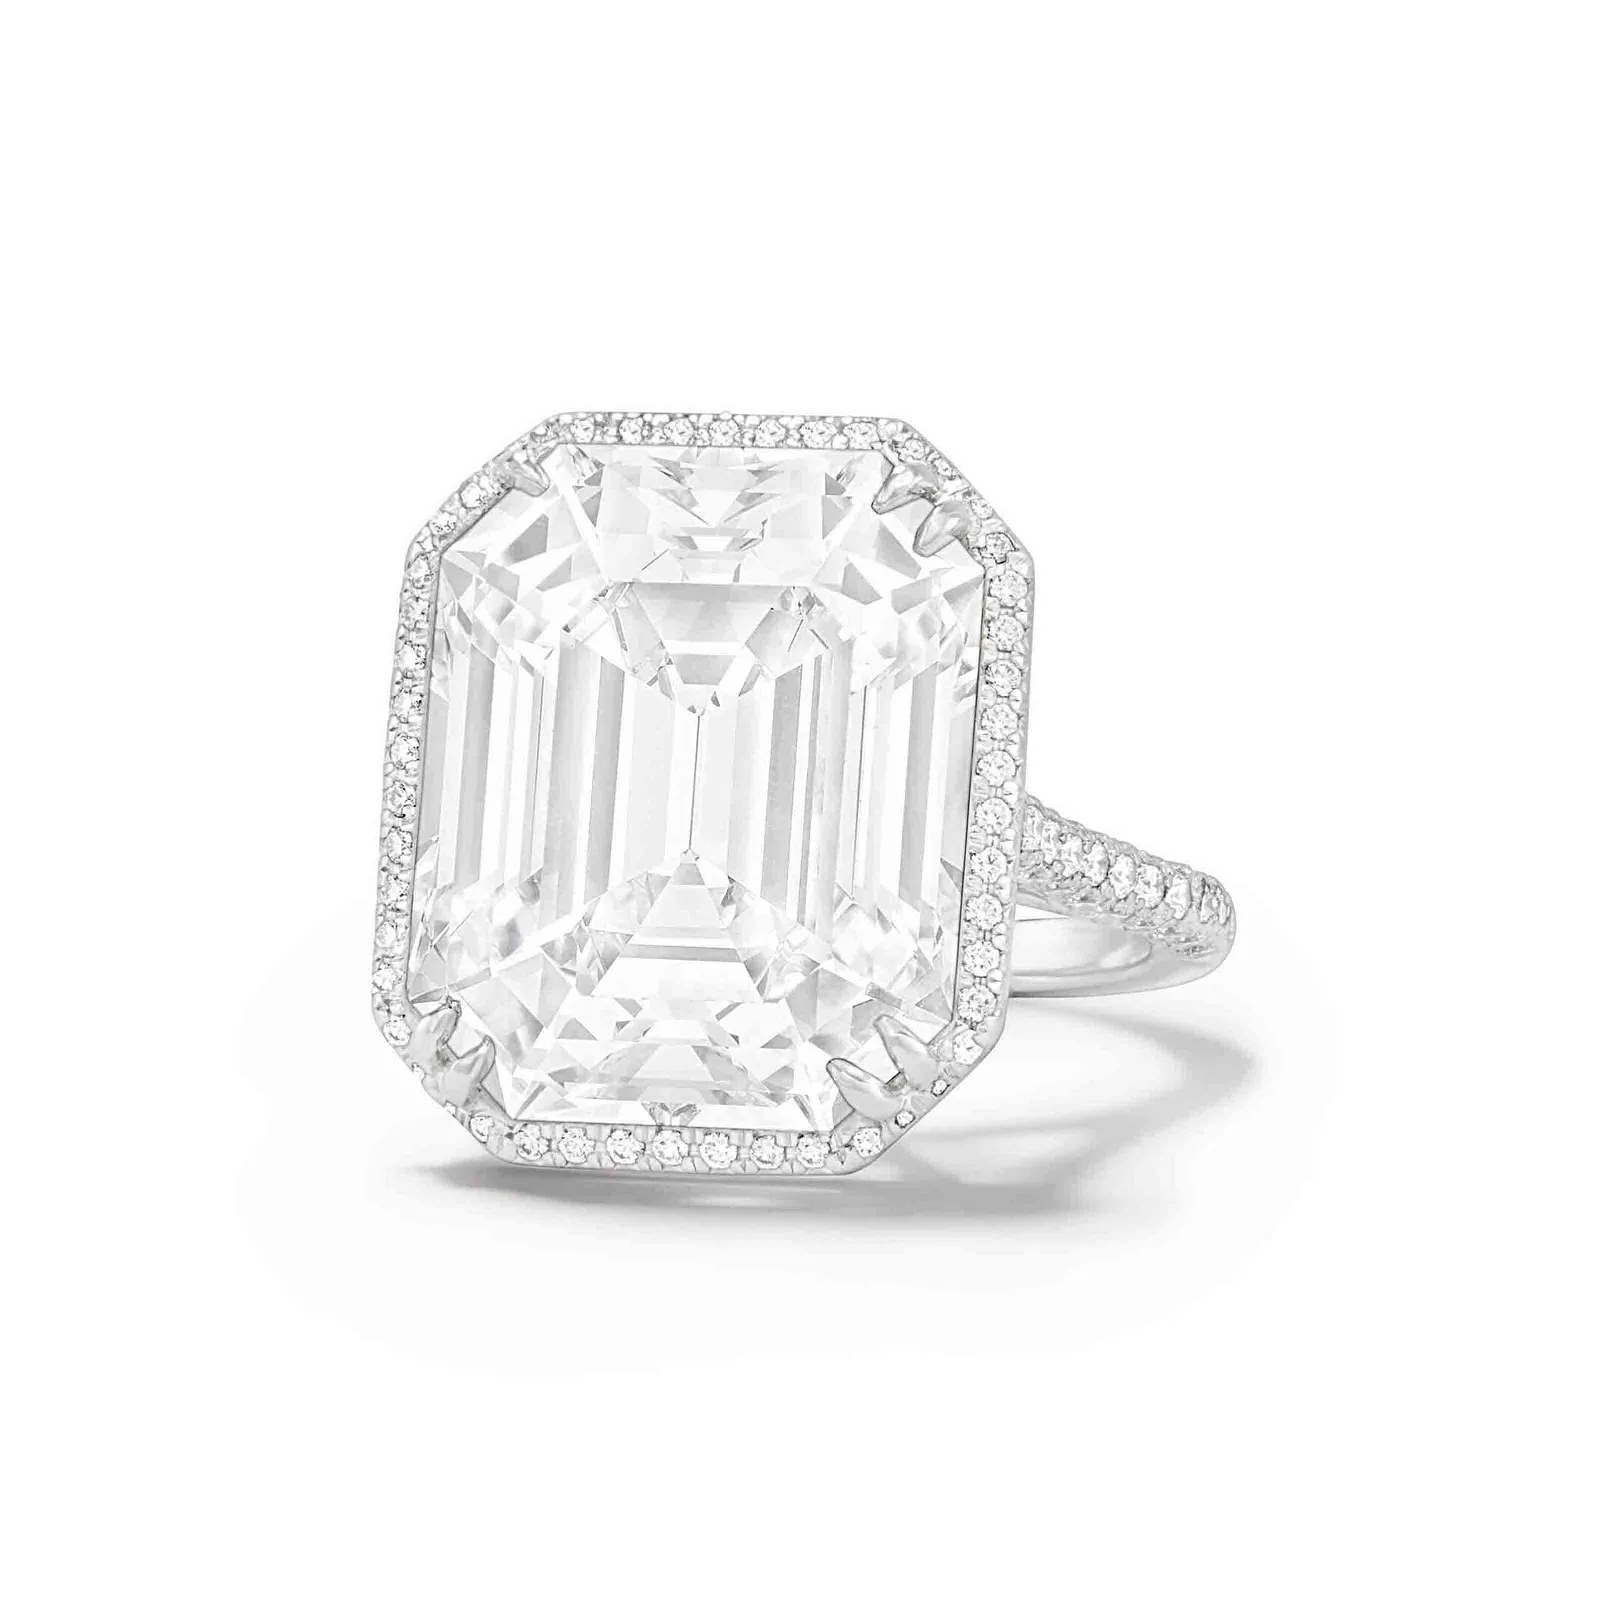 Spectacular 15.28-carat Tiffany diamond ring shines brightest at Christie&#8217;s Sept. 27